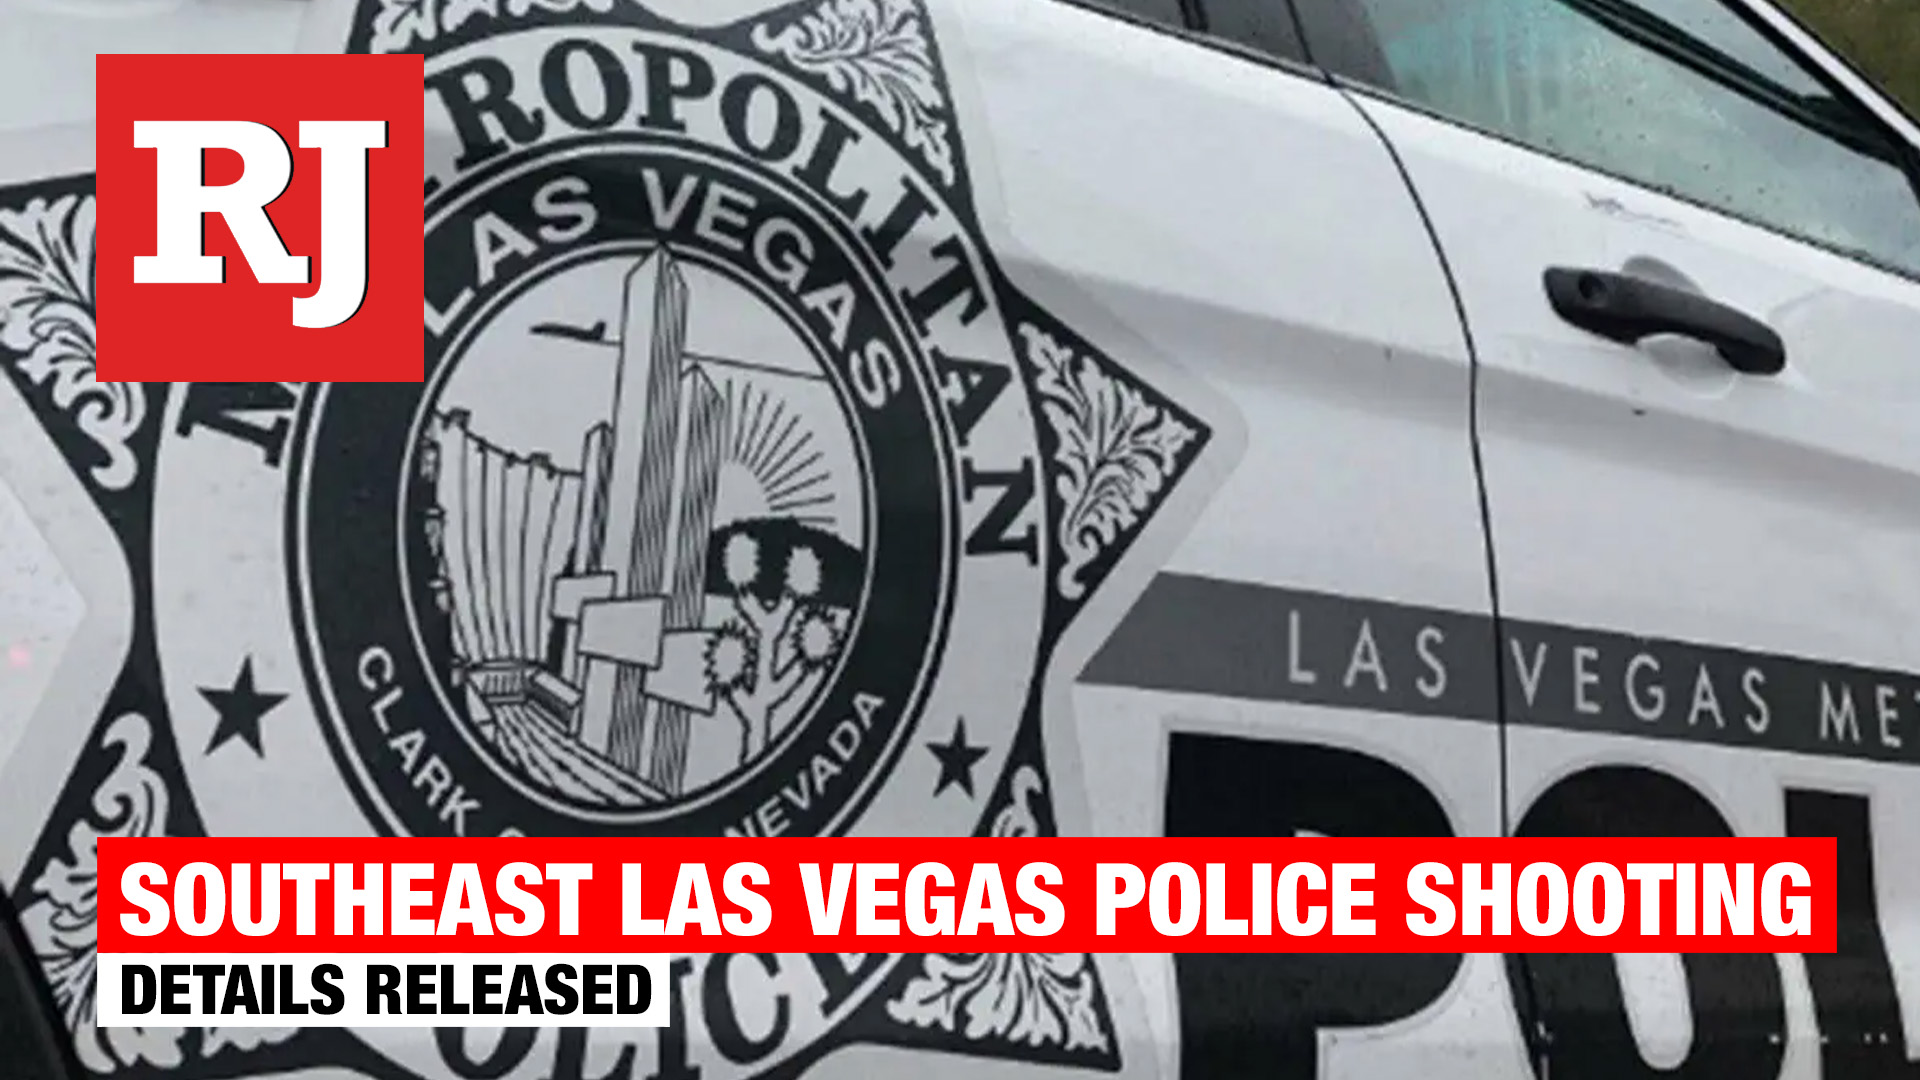 Metro to release details of southeast Las Vegas police shooting